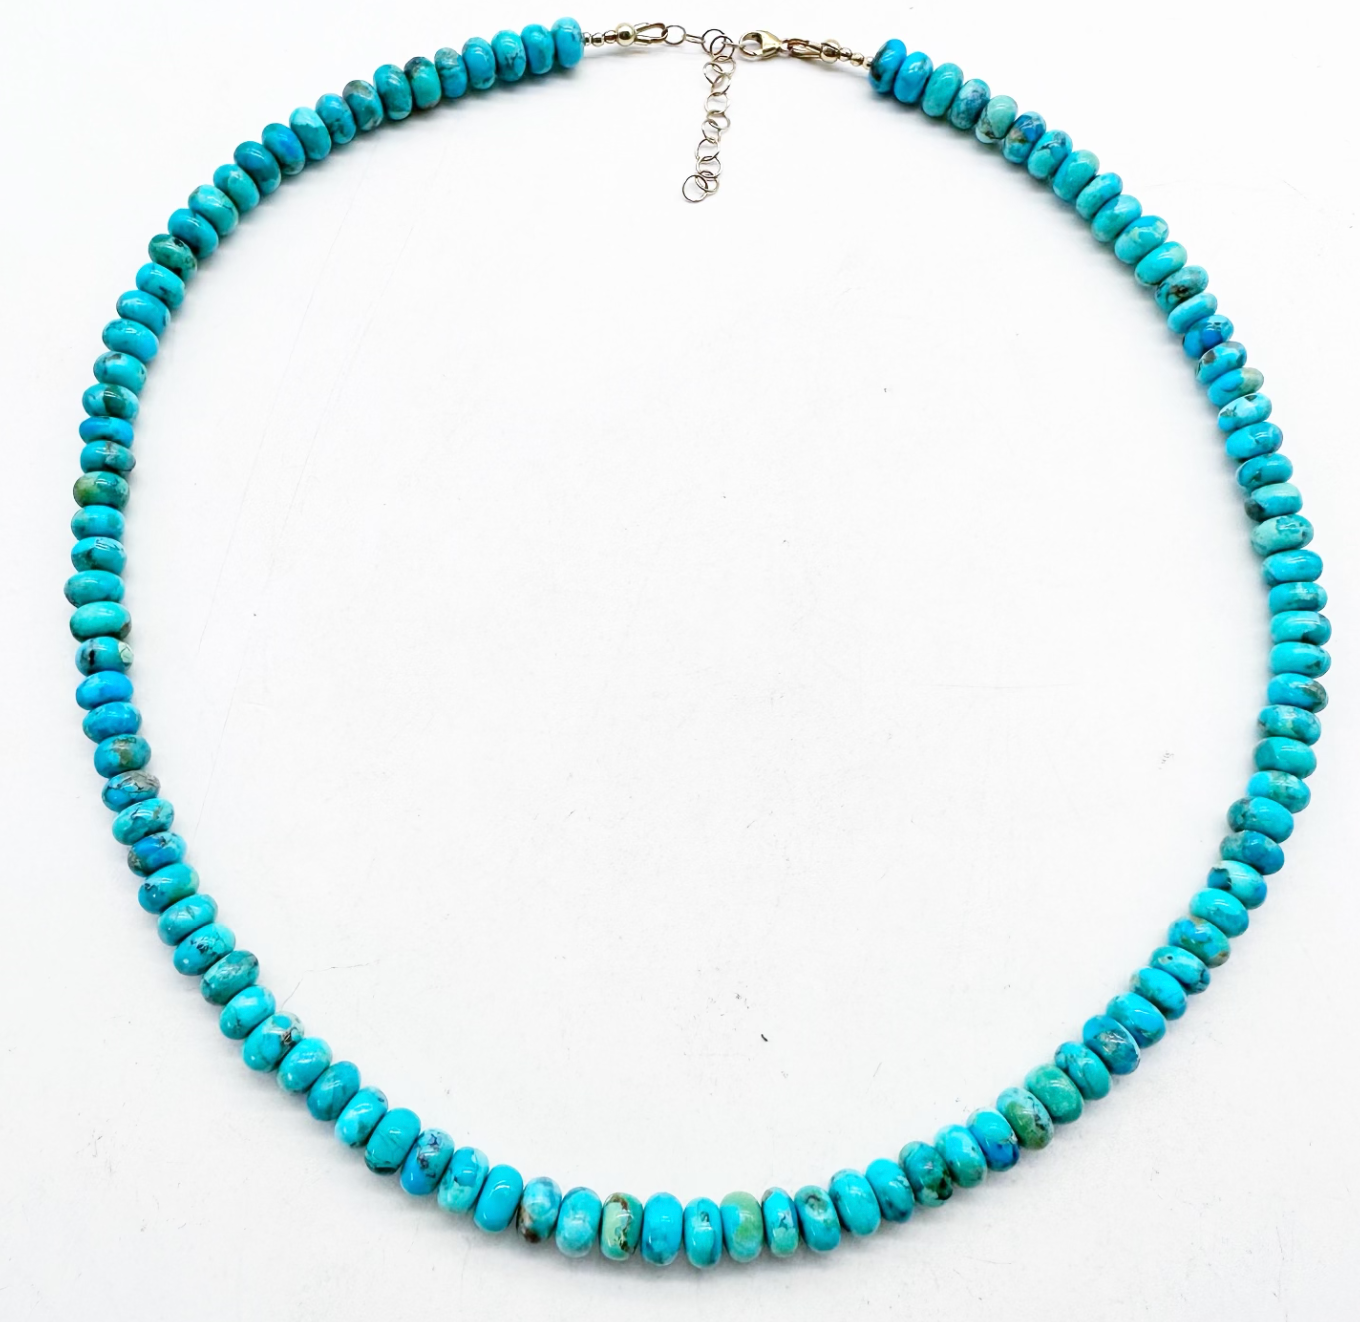 6-7MM BLUE TURQUOISE NECKLACE